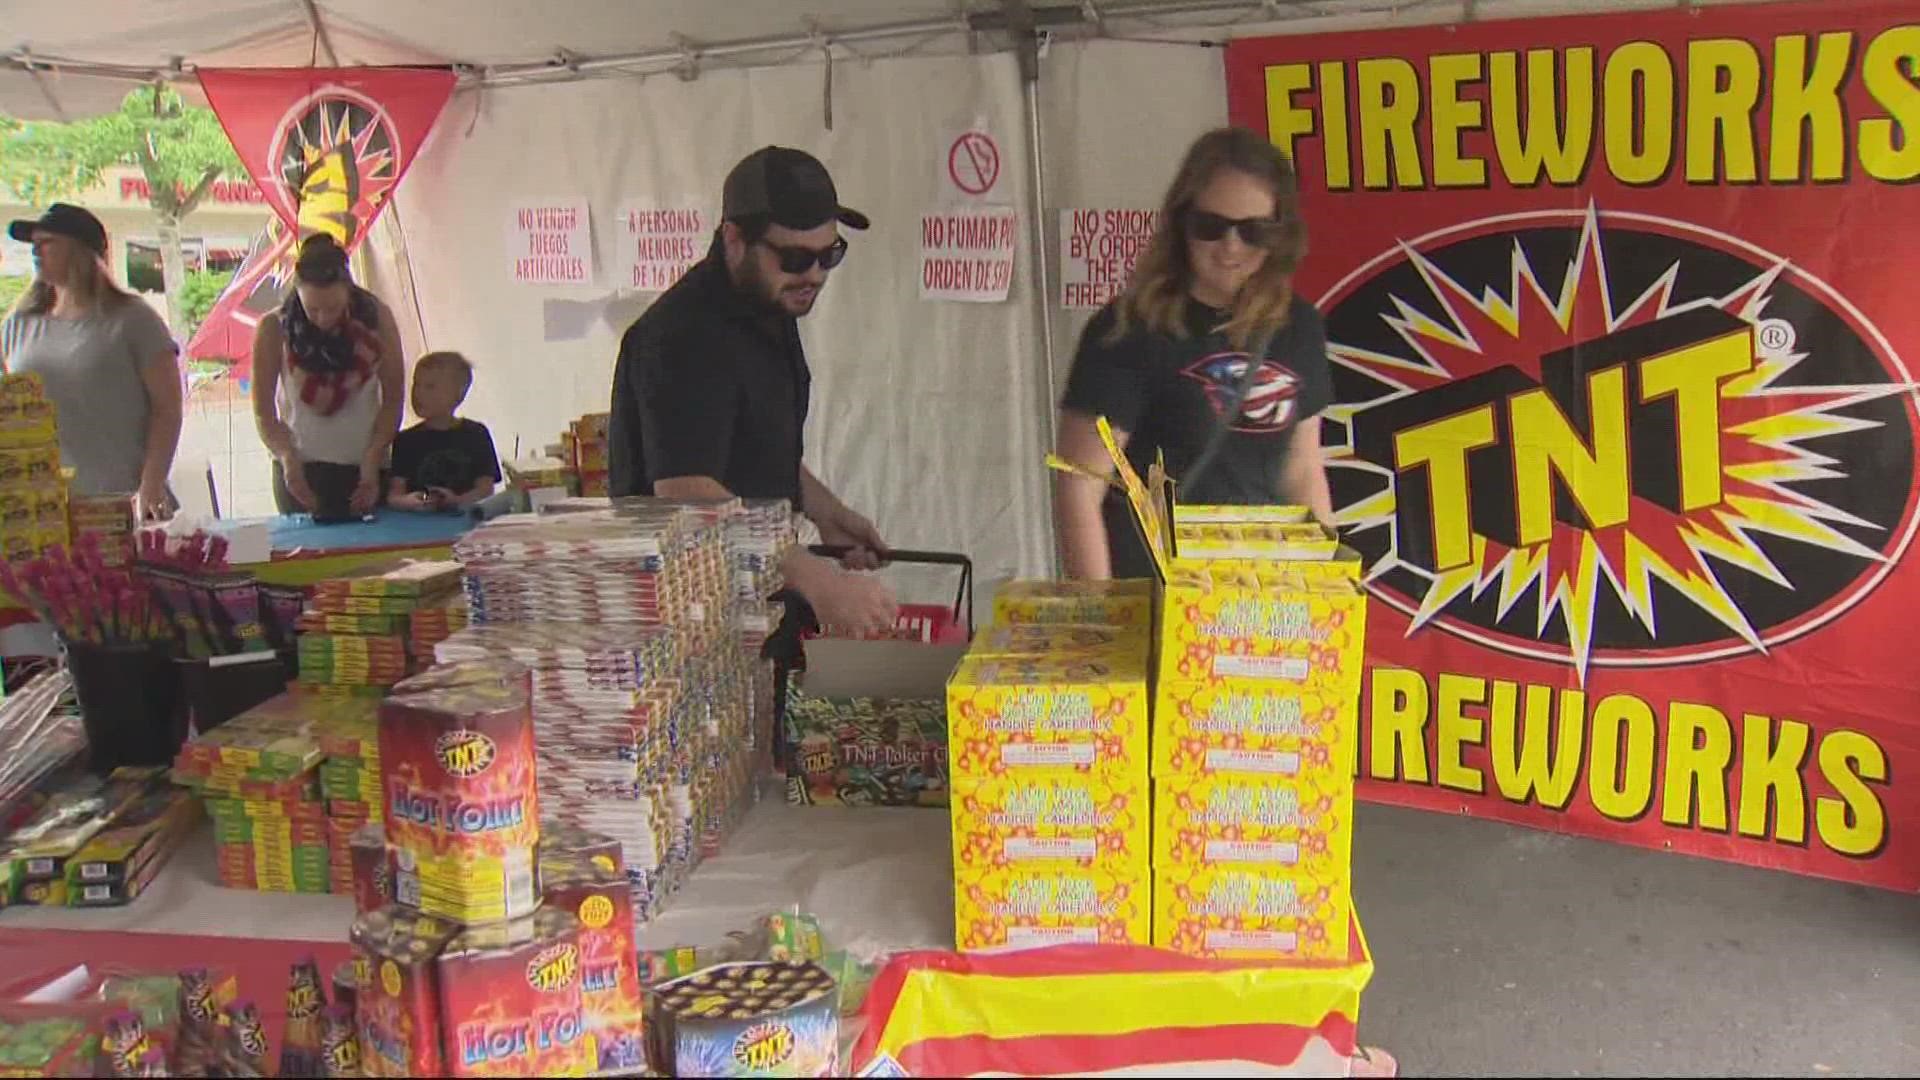 Portland City Council voted unanimously Wednesday, March 2, to ban the sale and use of fireworks in the city. KGW's Katherine Cook reports.